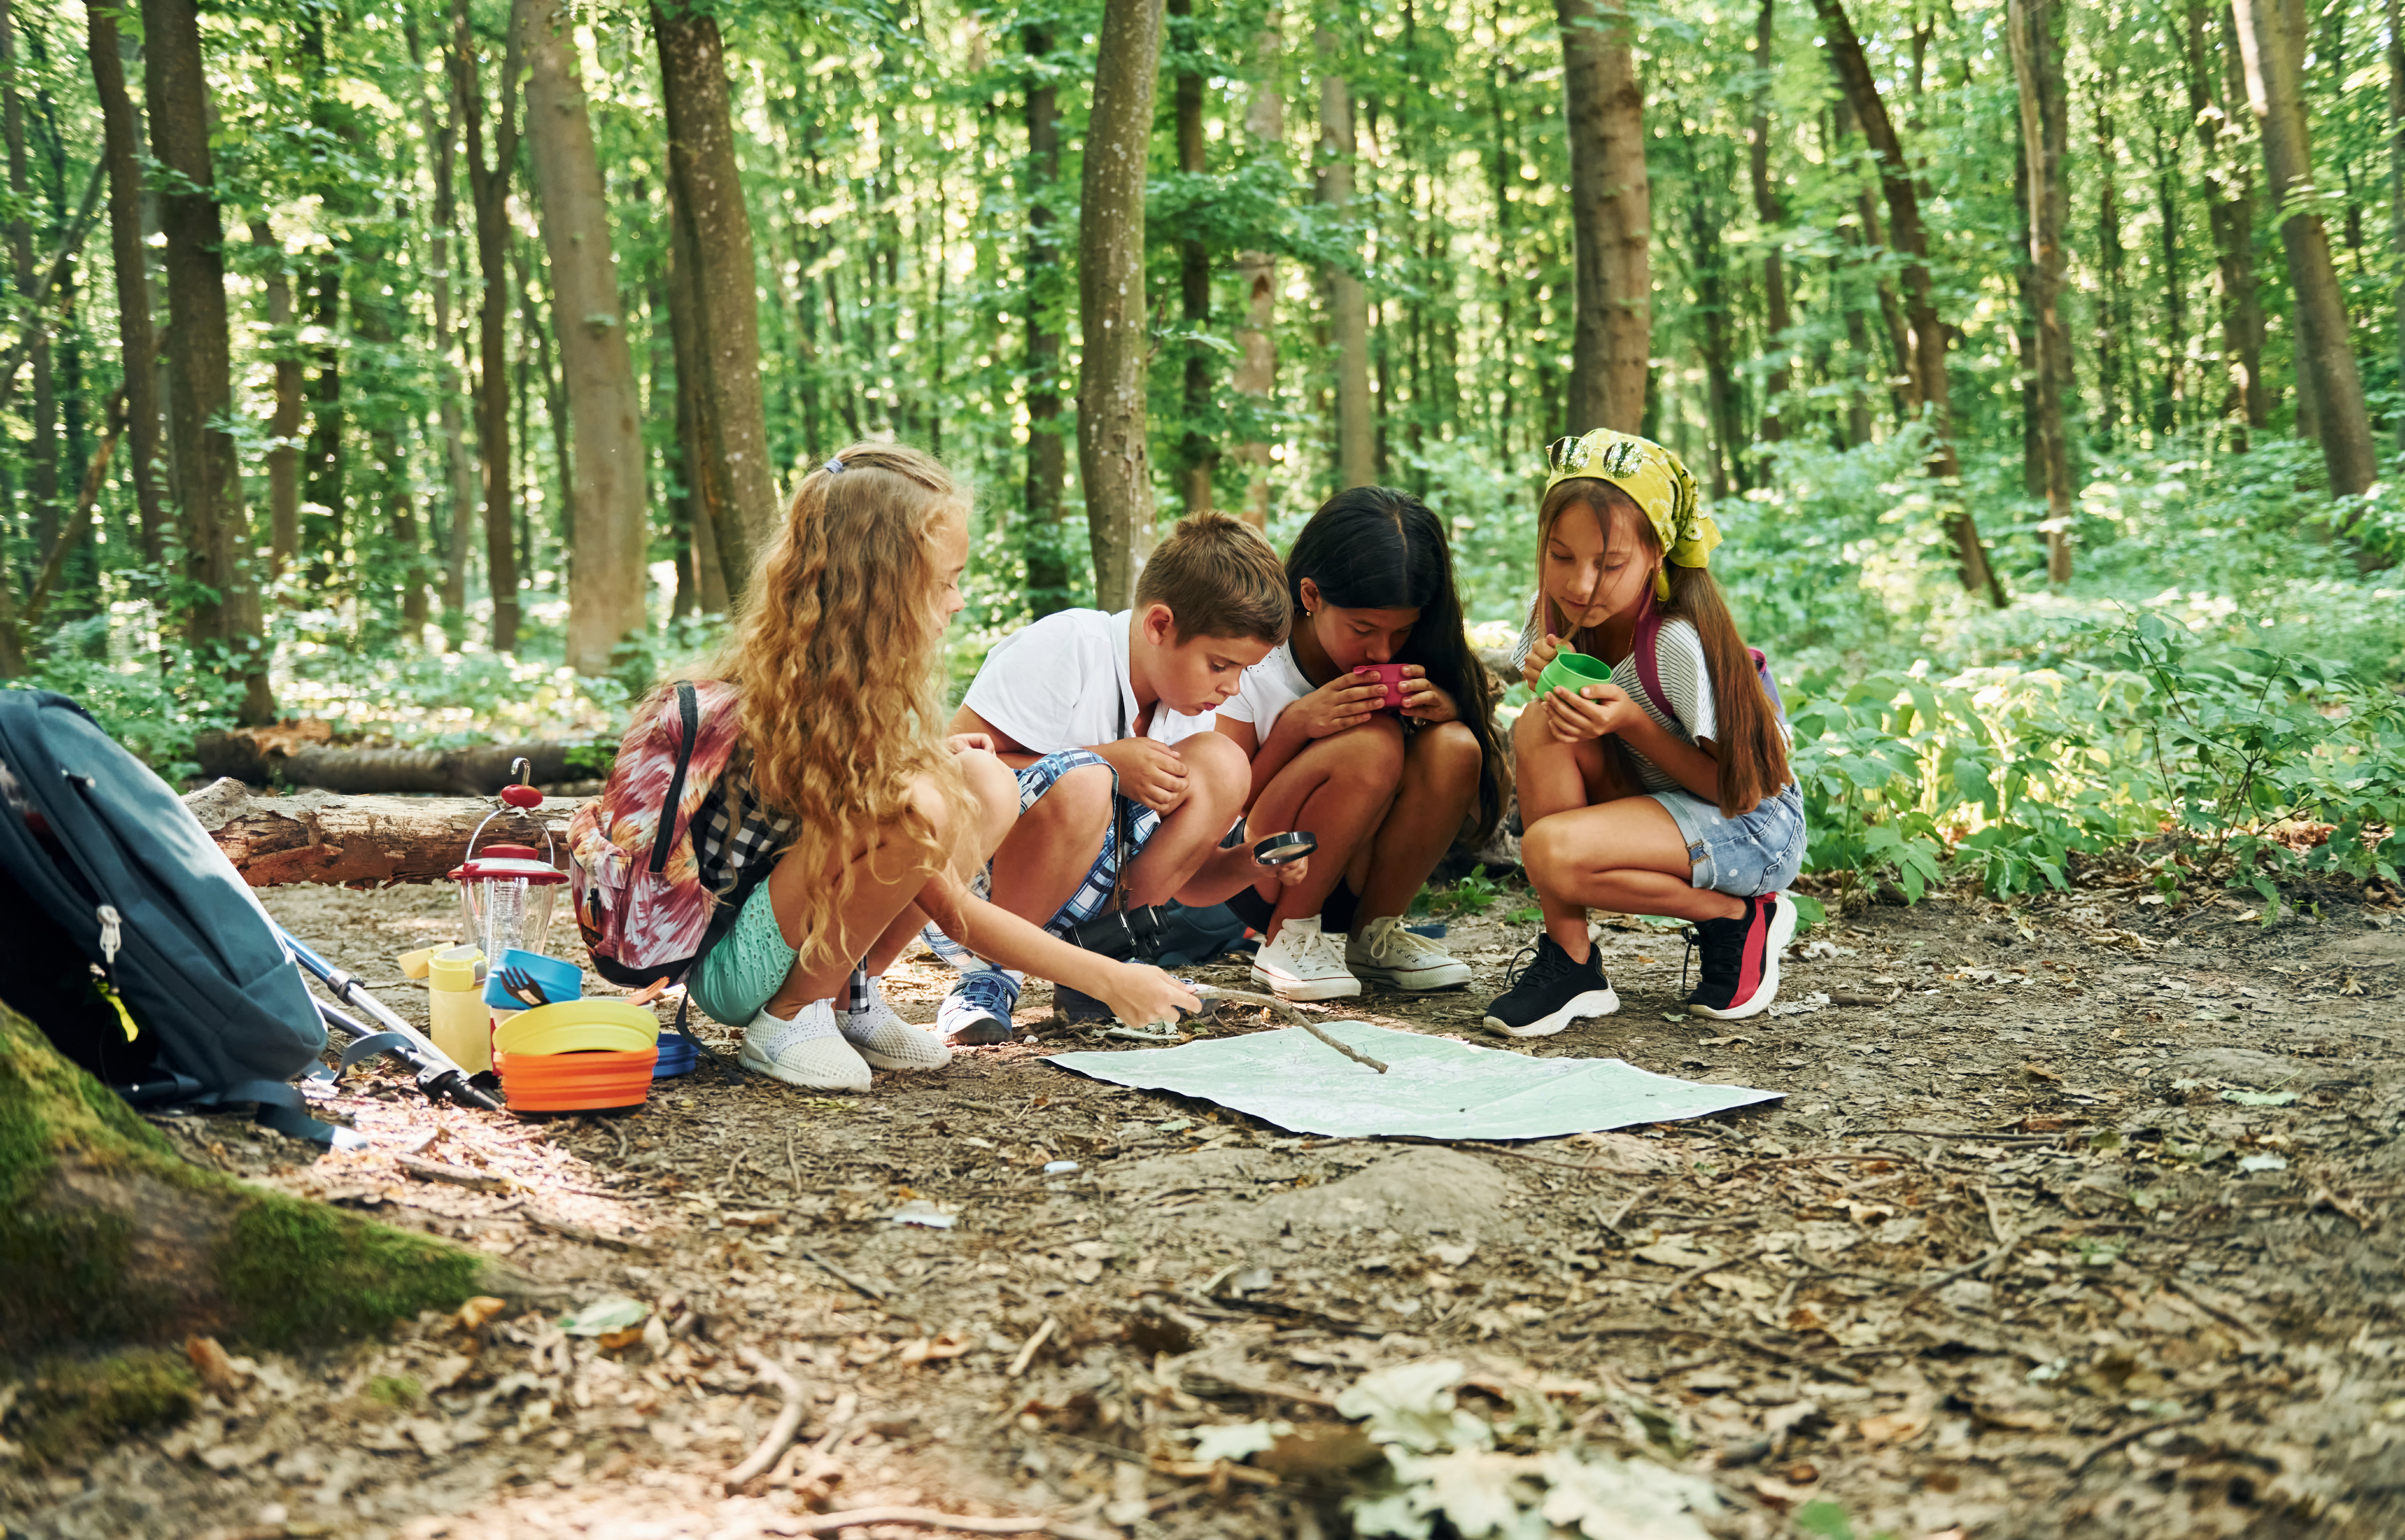 sitting-in-the-camp-kids-strolling-in-the-forest-2021-09-23-06-56-25-utc